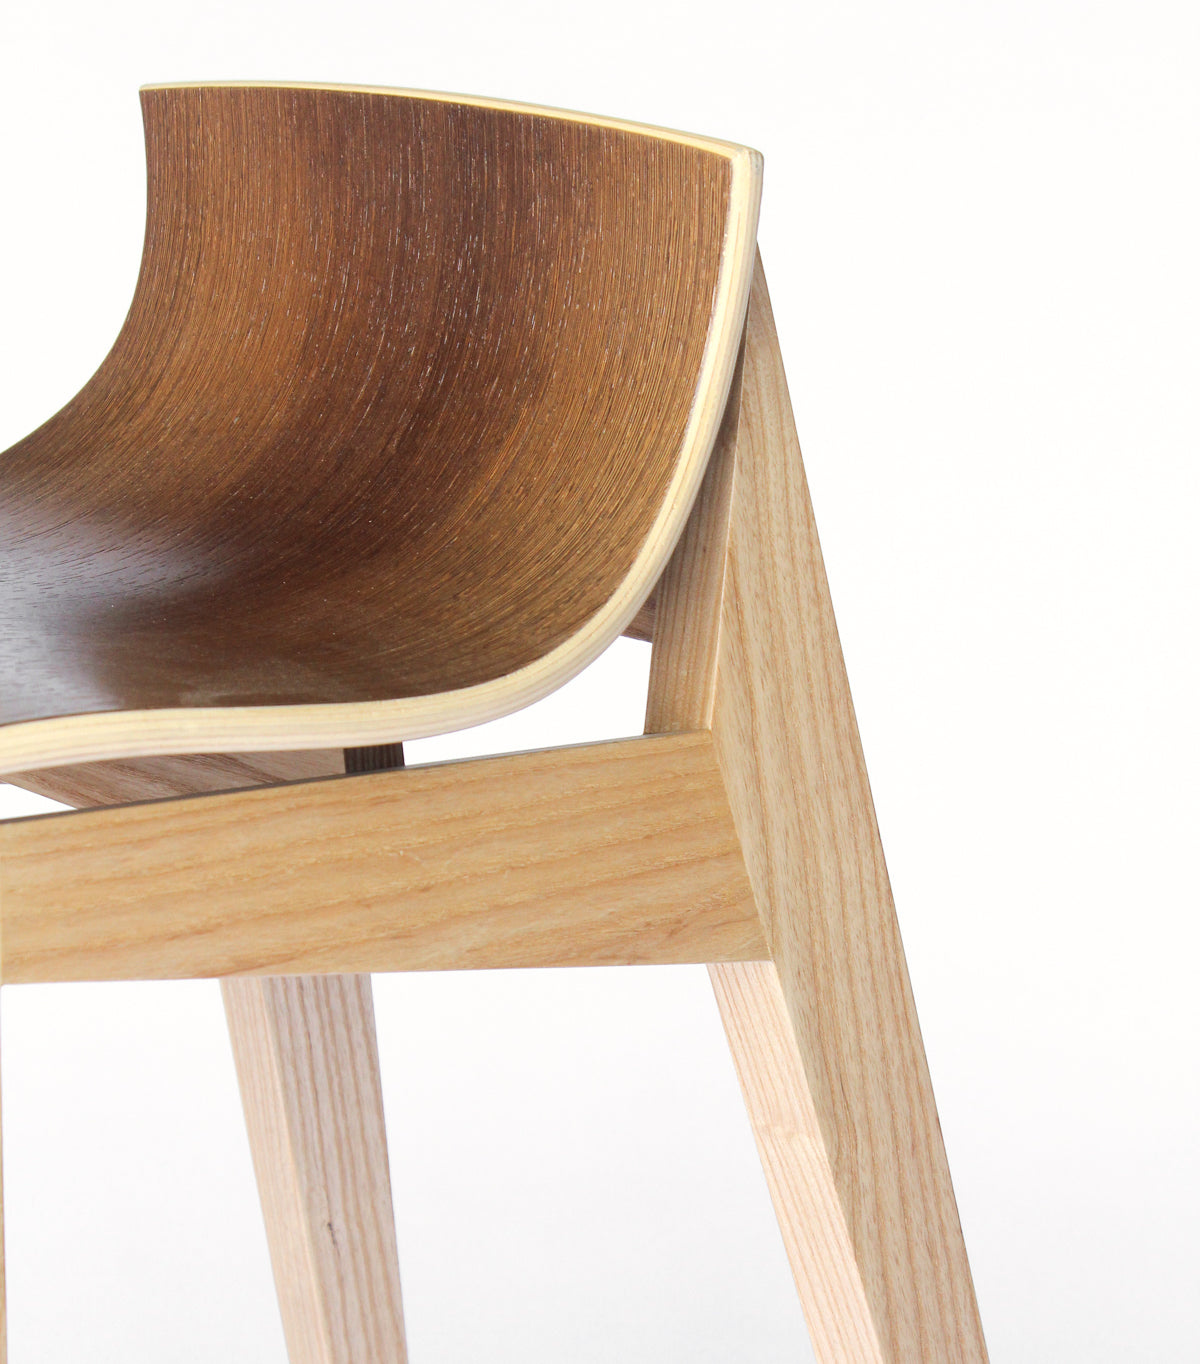 Stella midcentury modern ash wood Stool handcrafted by Hunt & Noyer in Michigan